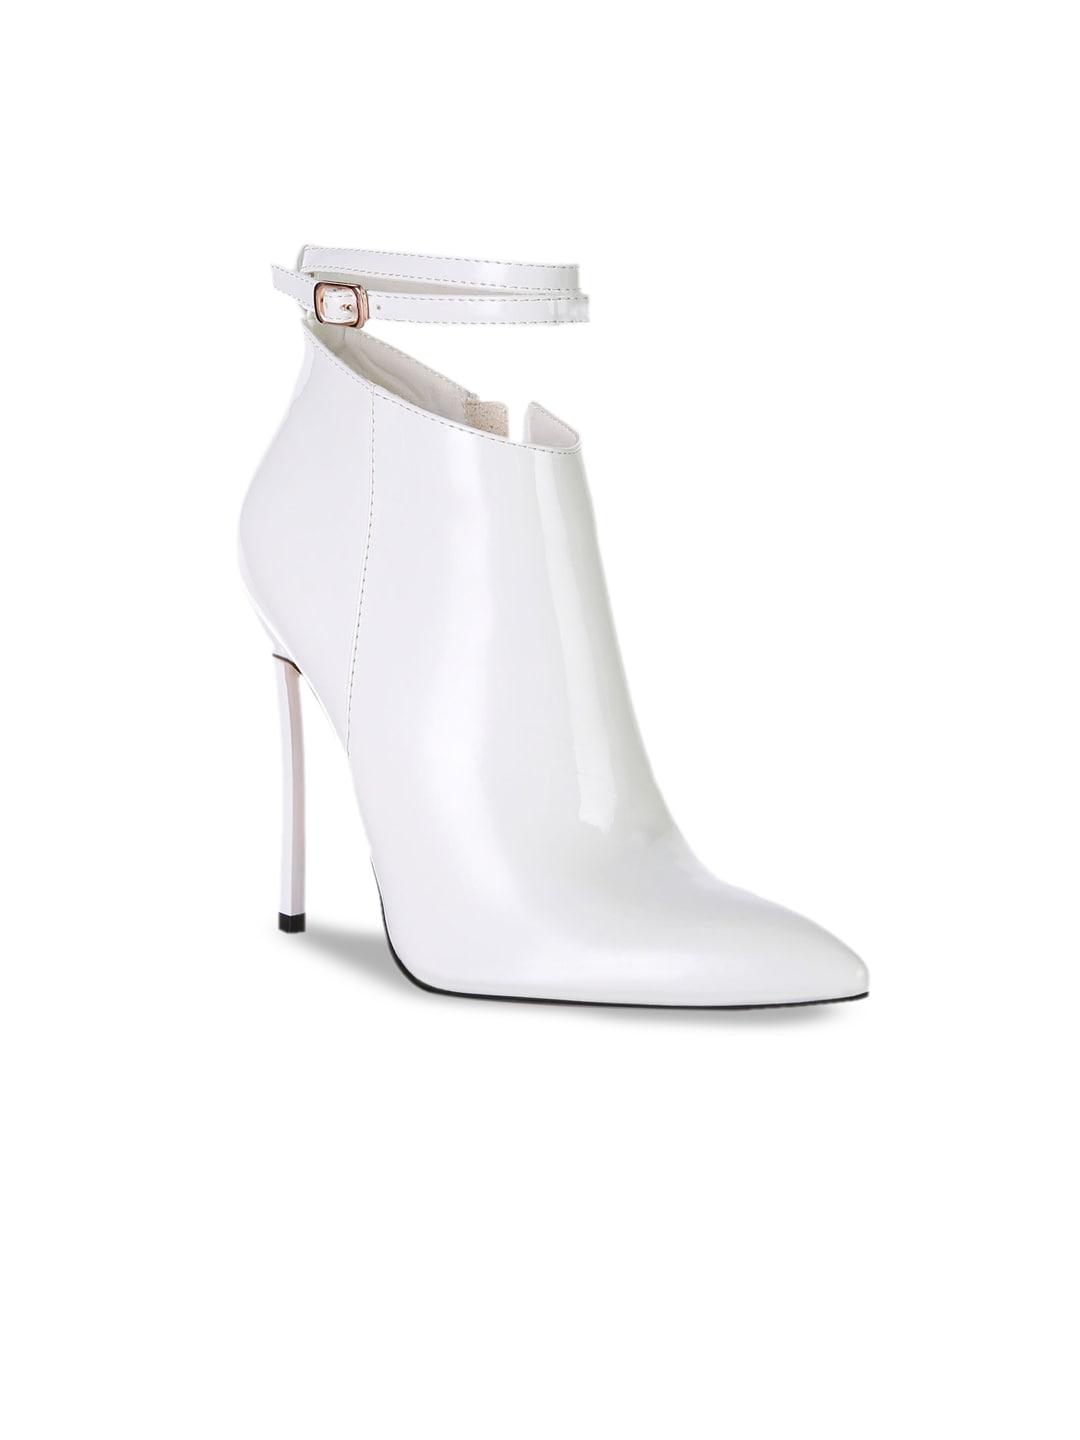 london rag women white solid leather party regular pointed toe high heeled boots